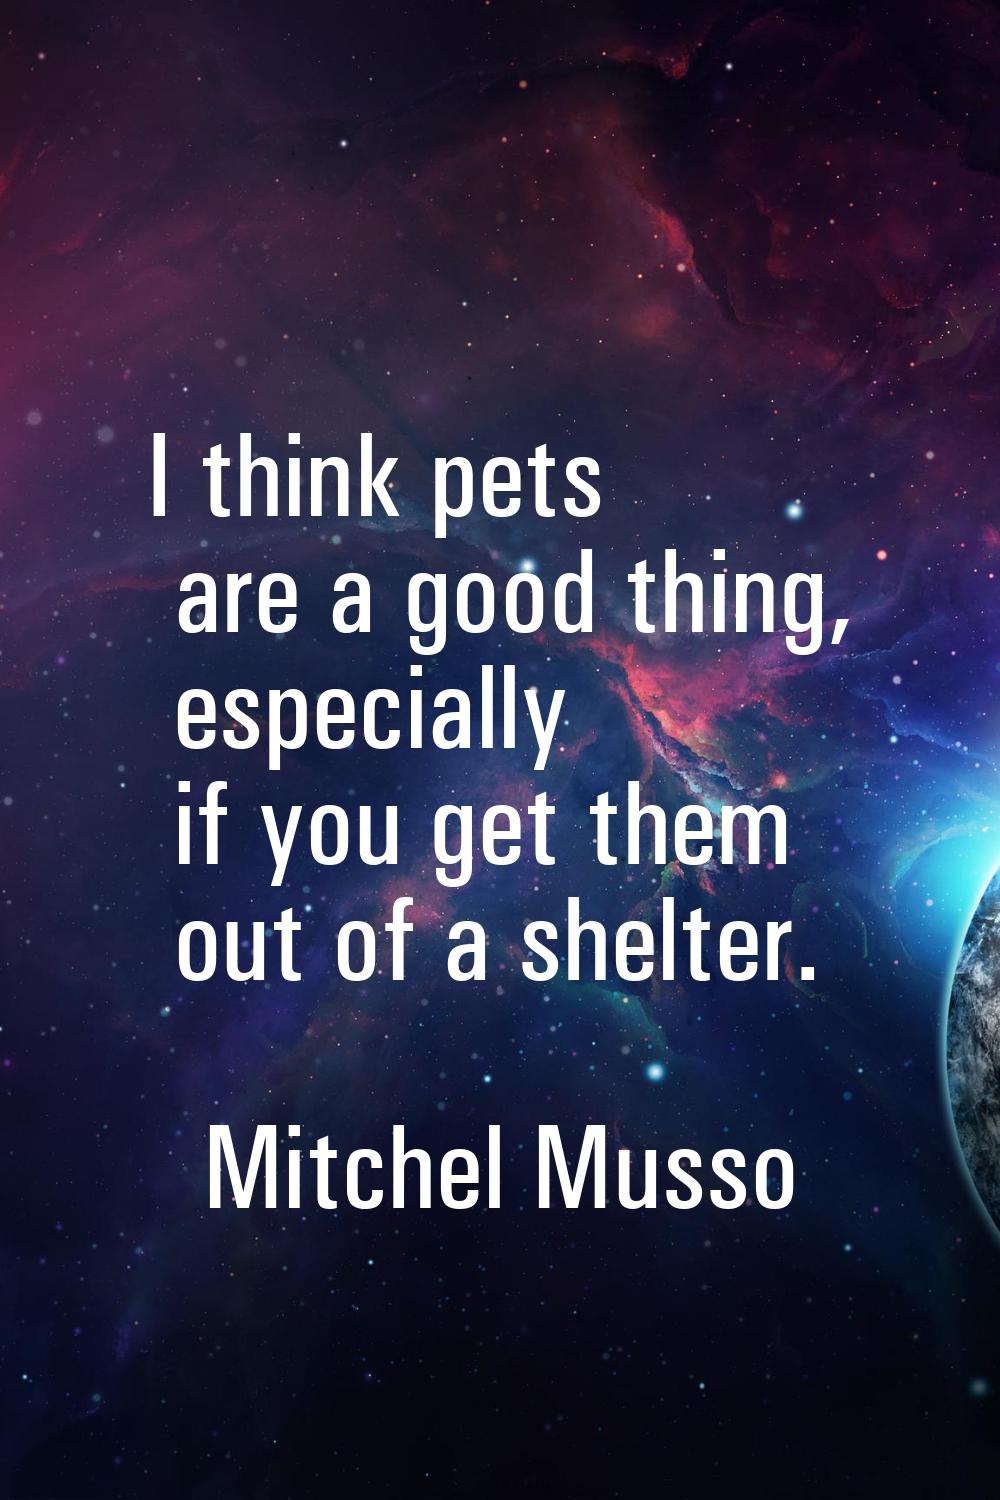 I think pets are a good thing, especially if you get them out of a shelter.